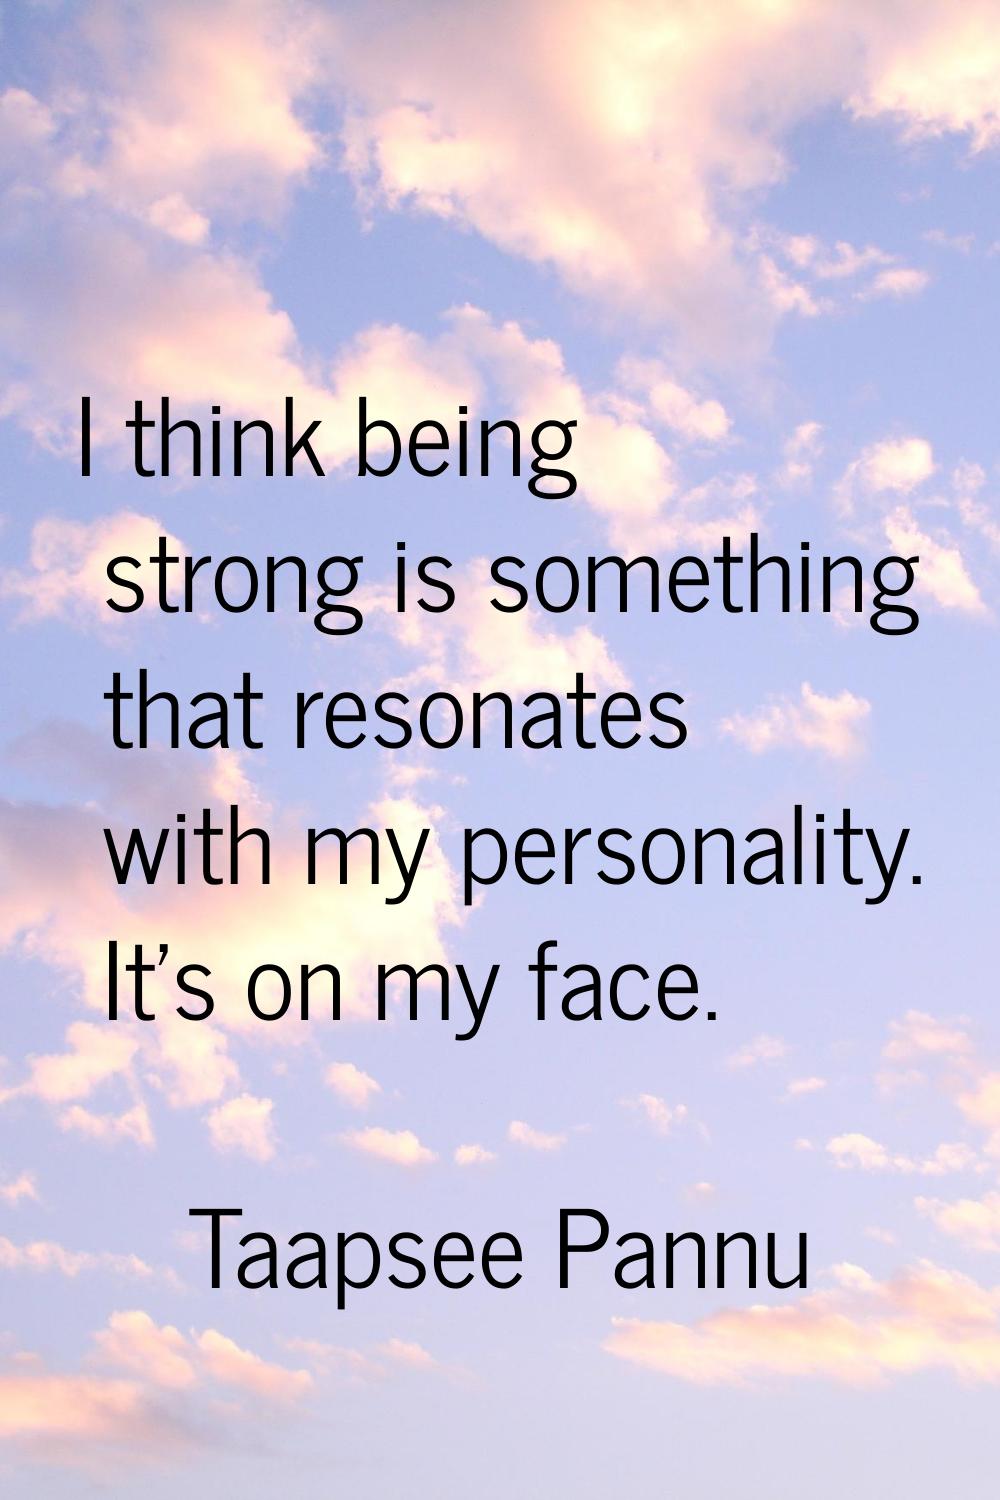 I think being strong is something that resonates with my personality. It's on my face.